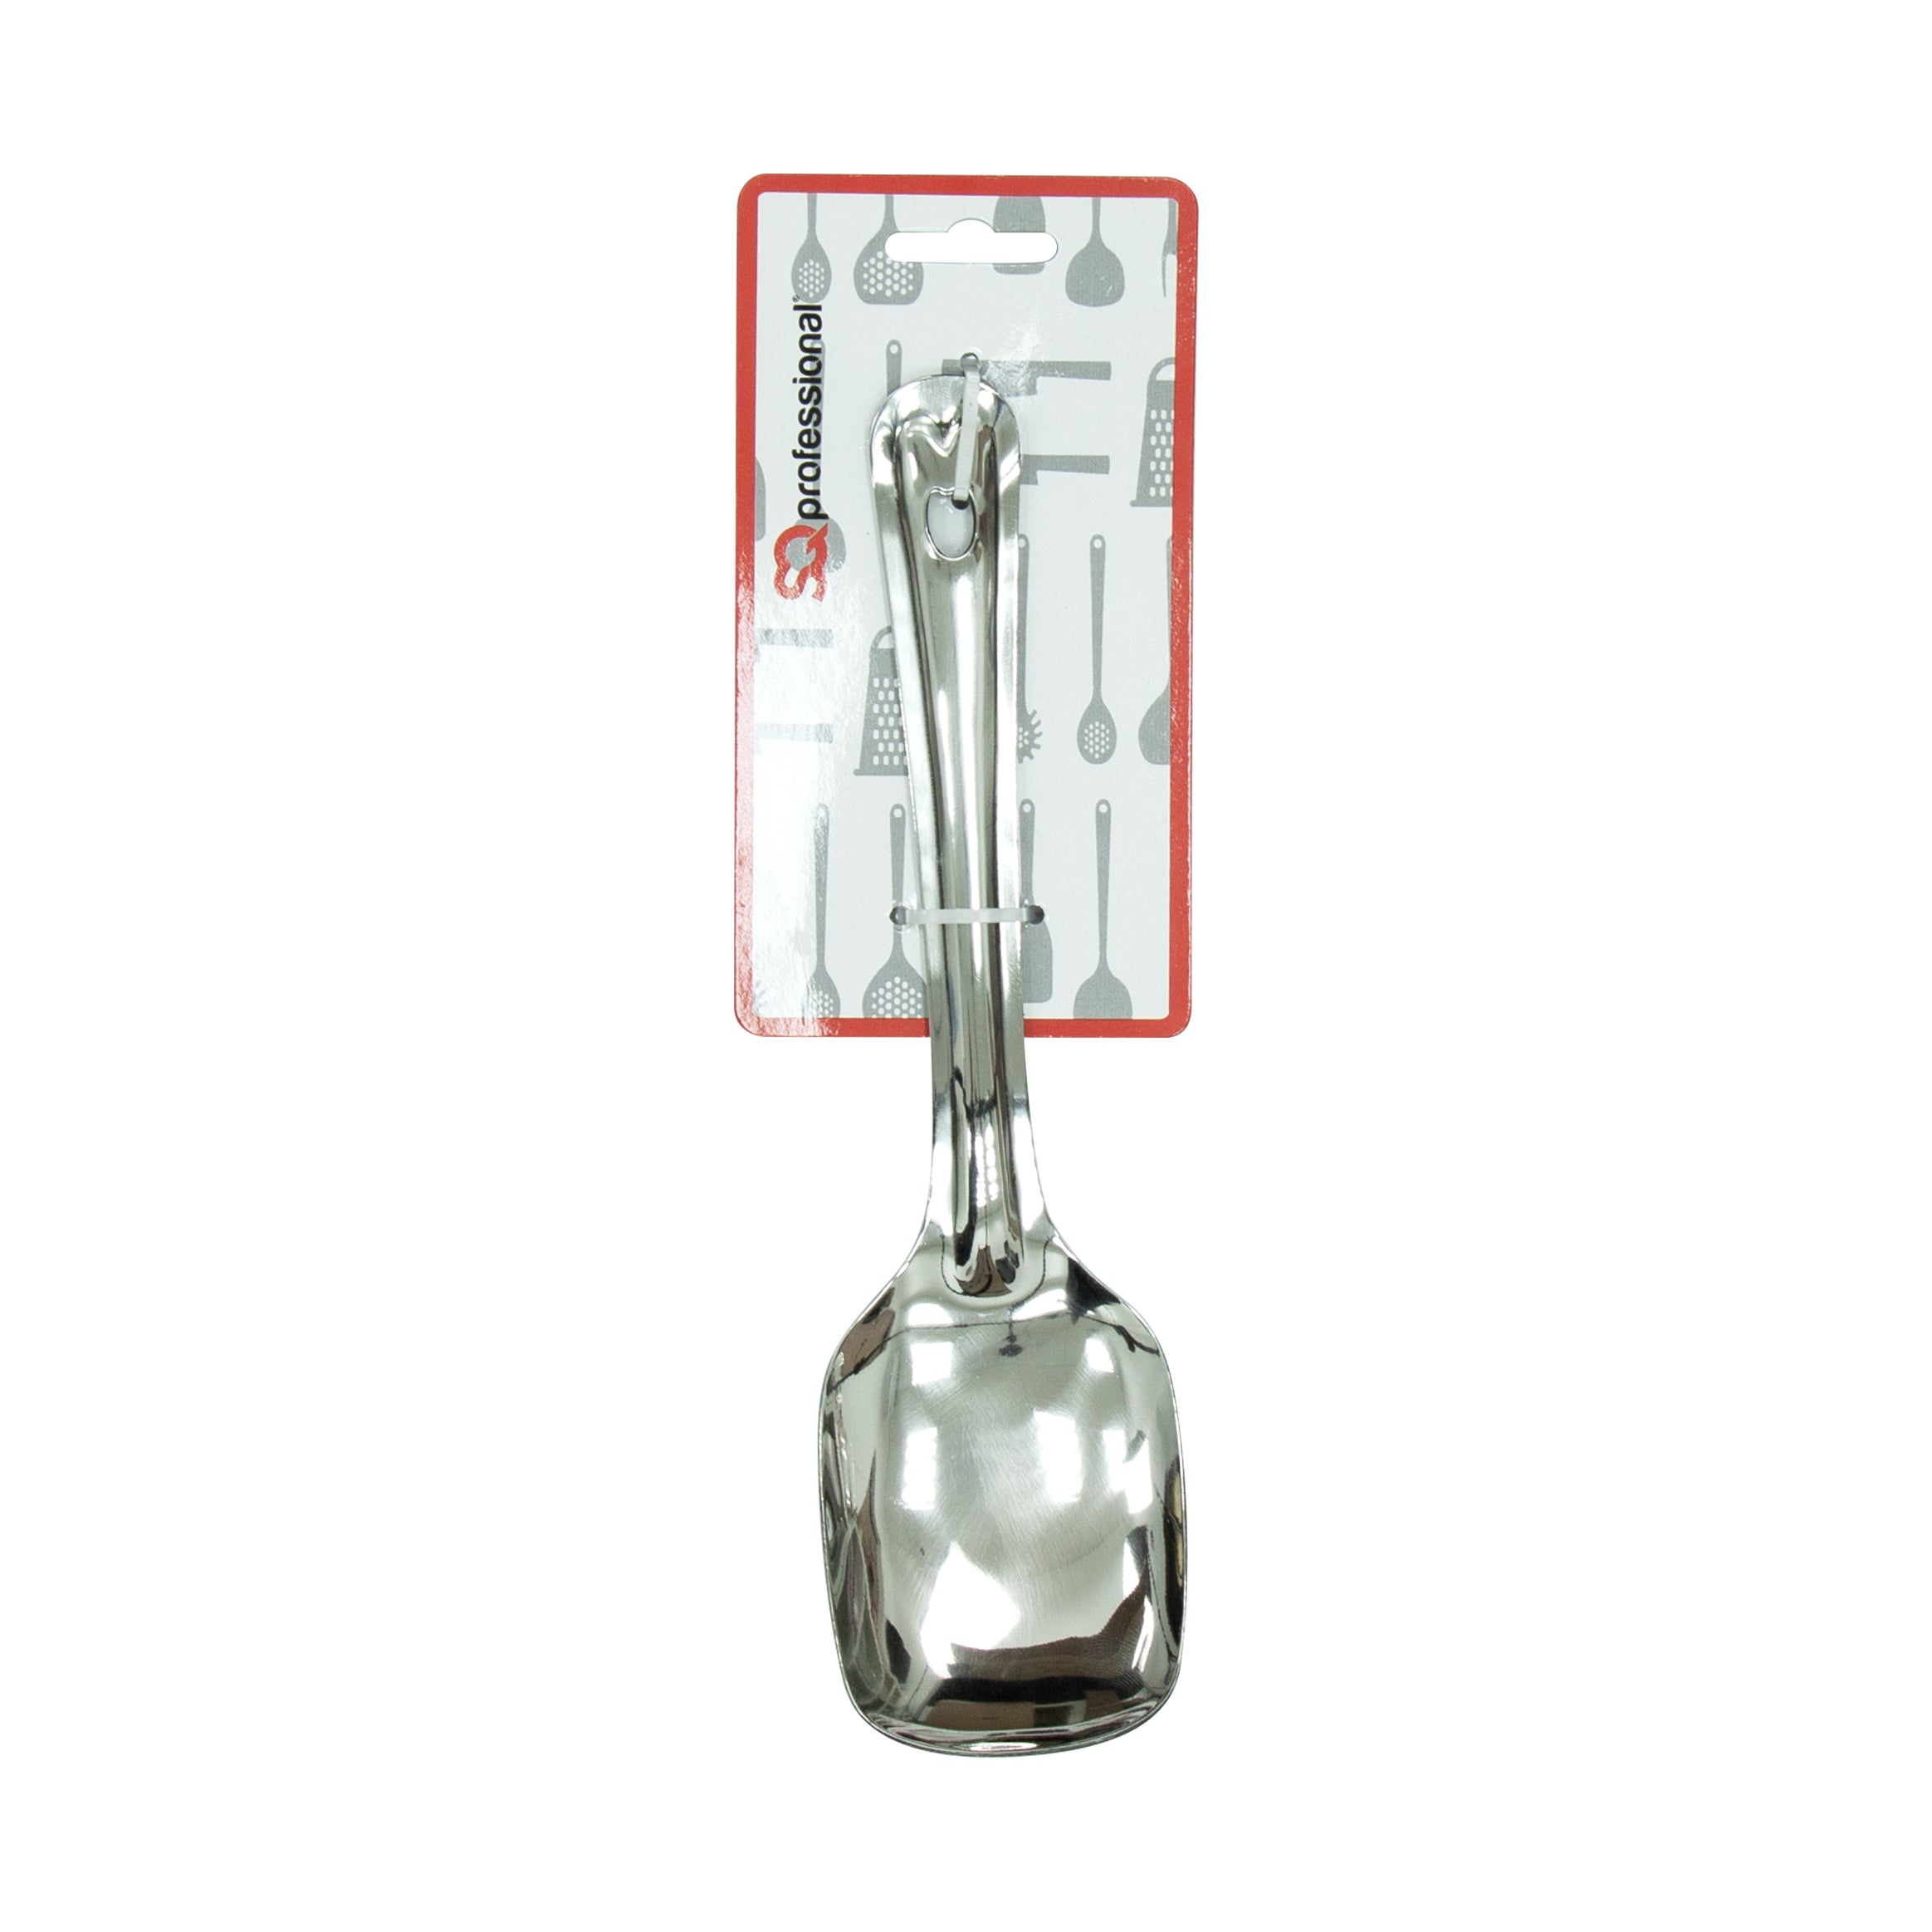 Stainless Steel Spoon - Square - 2 Pcs Set - 23 cm